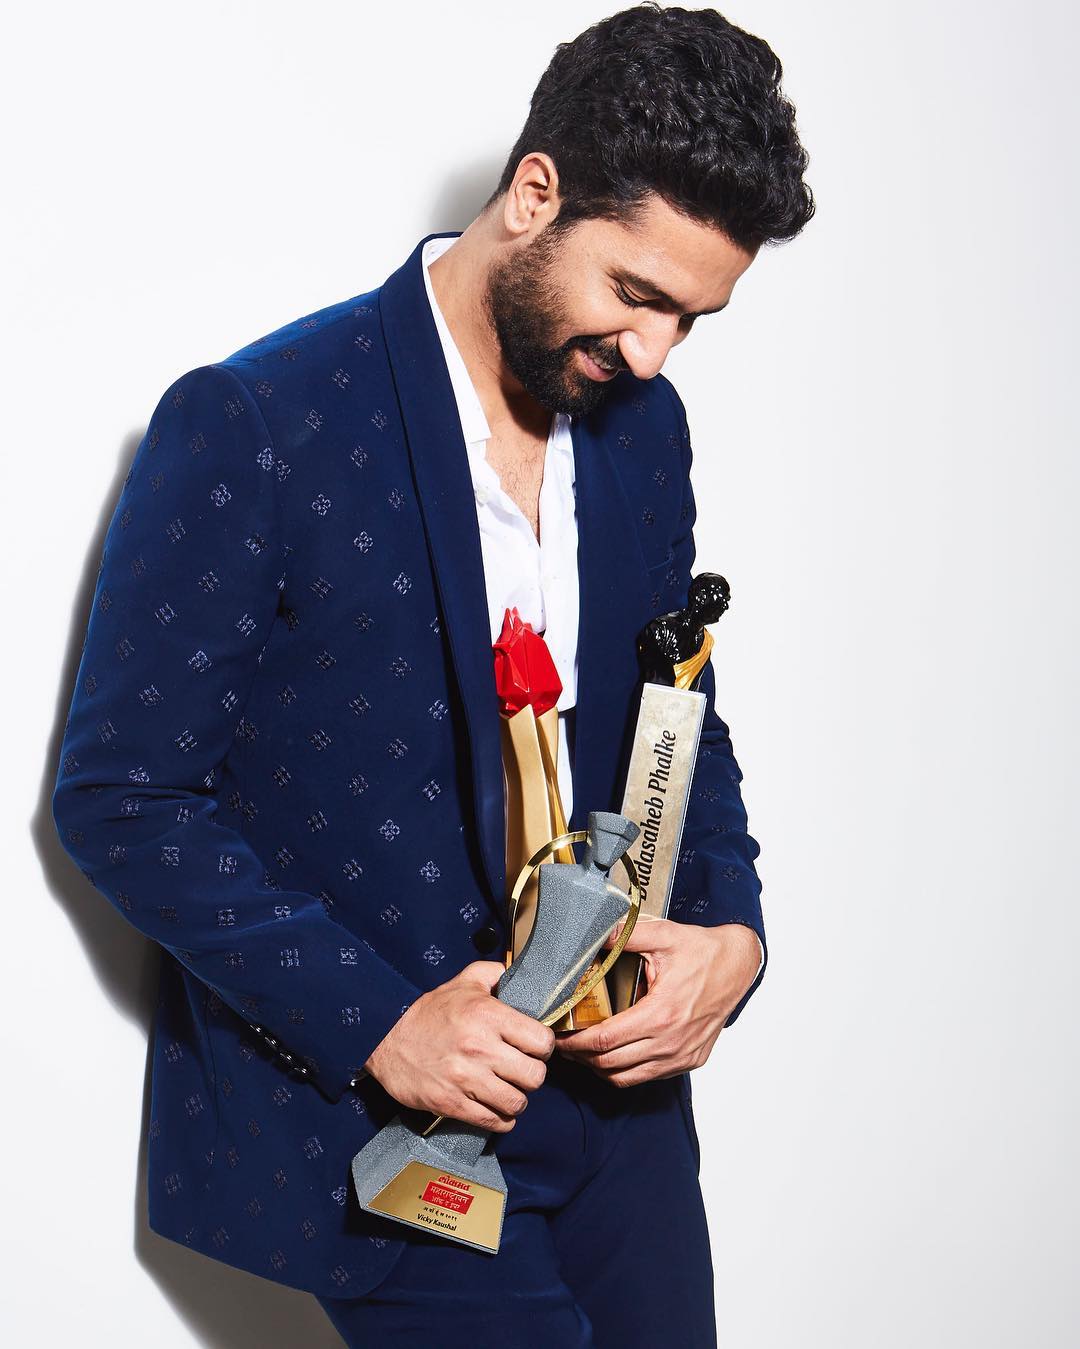 Vicky Kaushal’s Role in Takht To Be Revamped